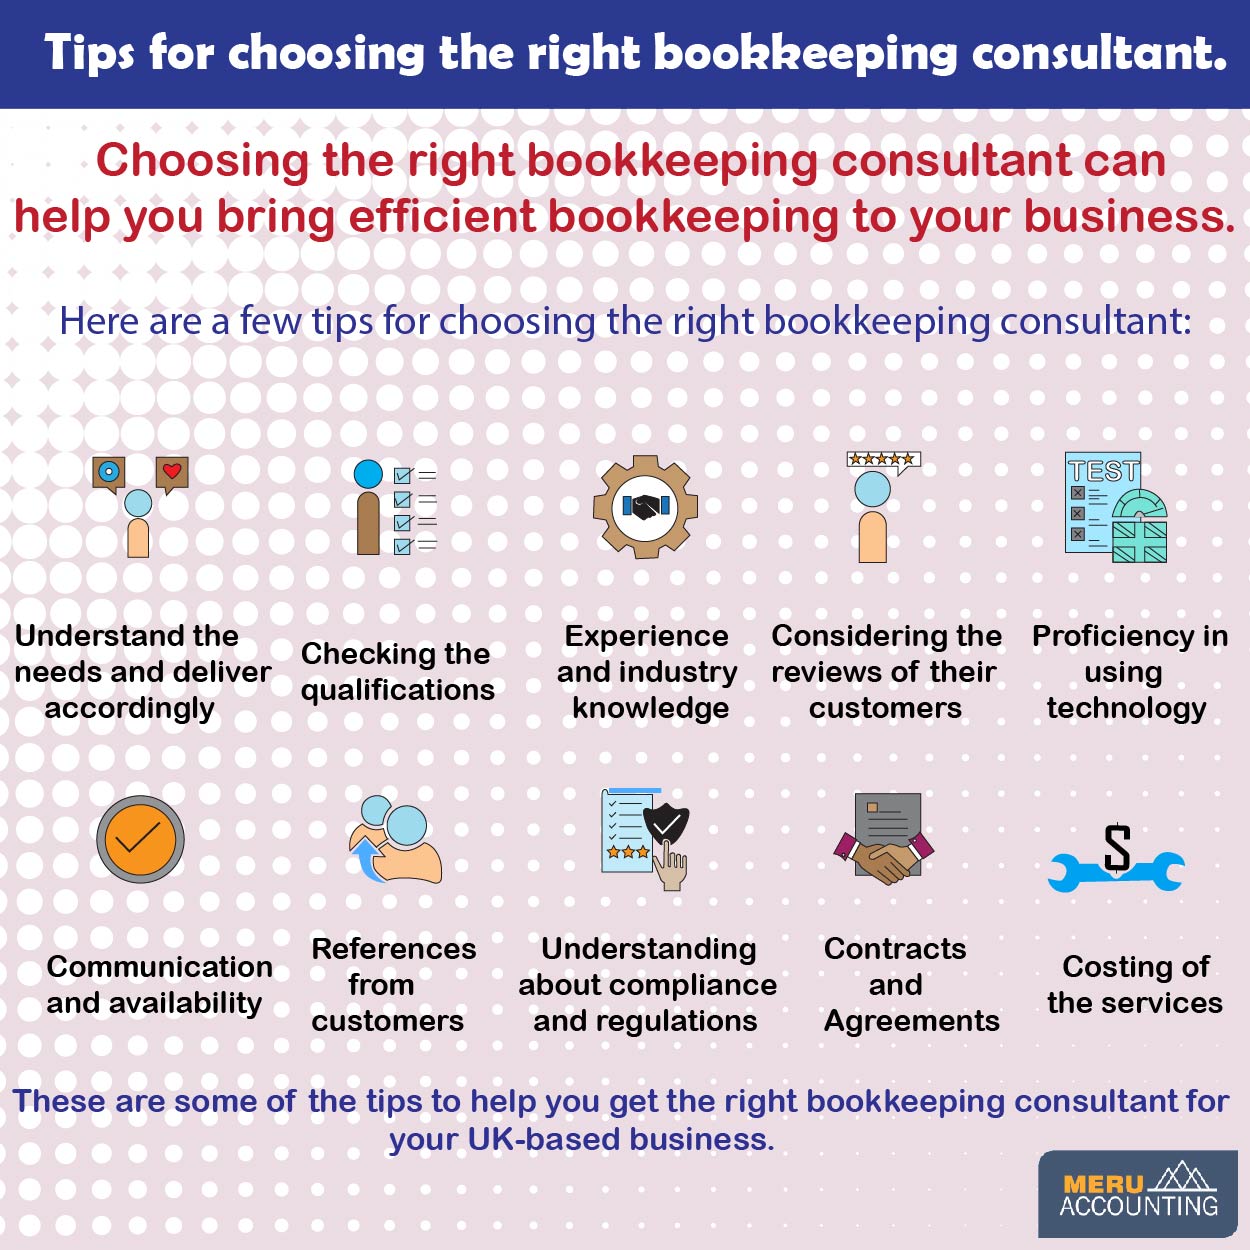 Tips for choosing the right bookkeeping consultant 01